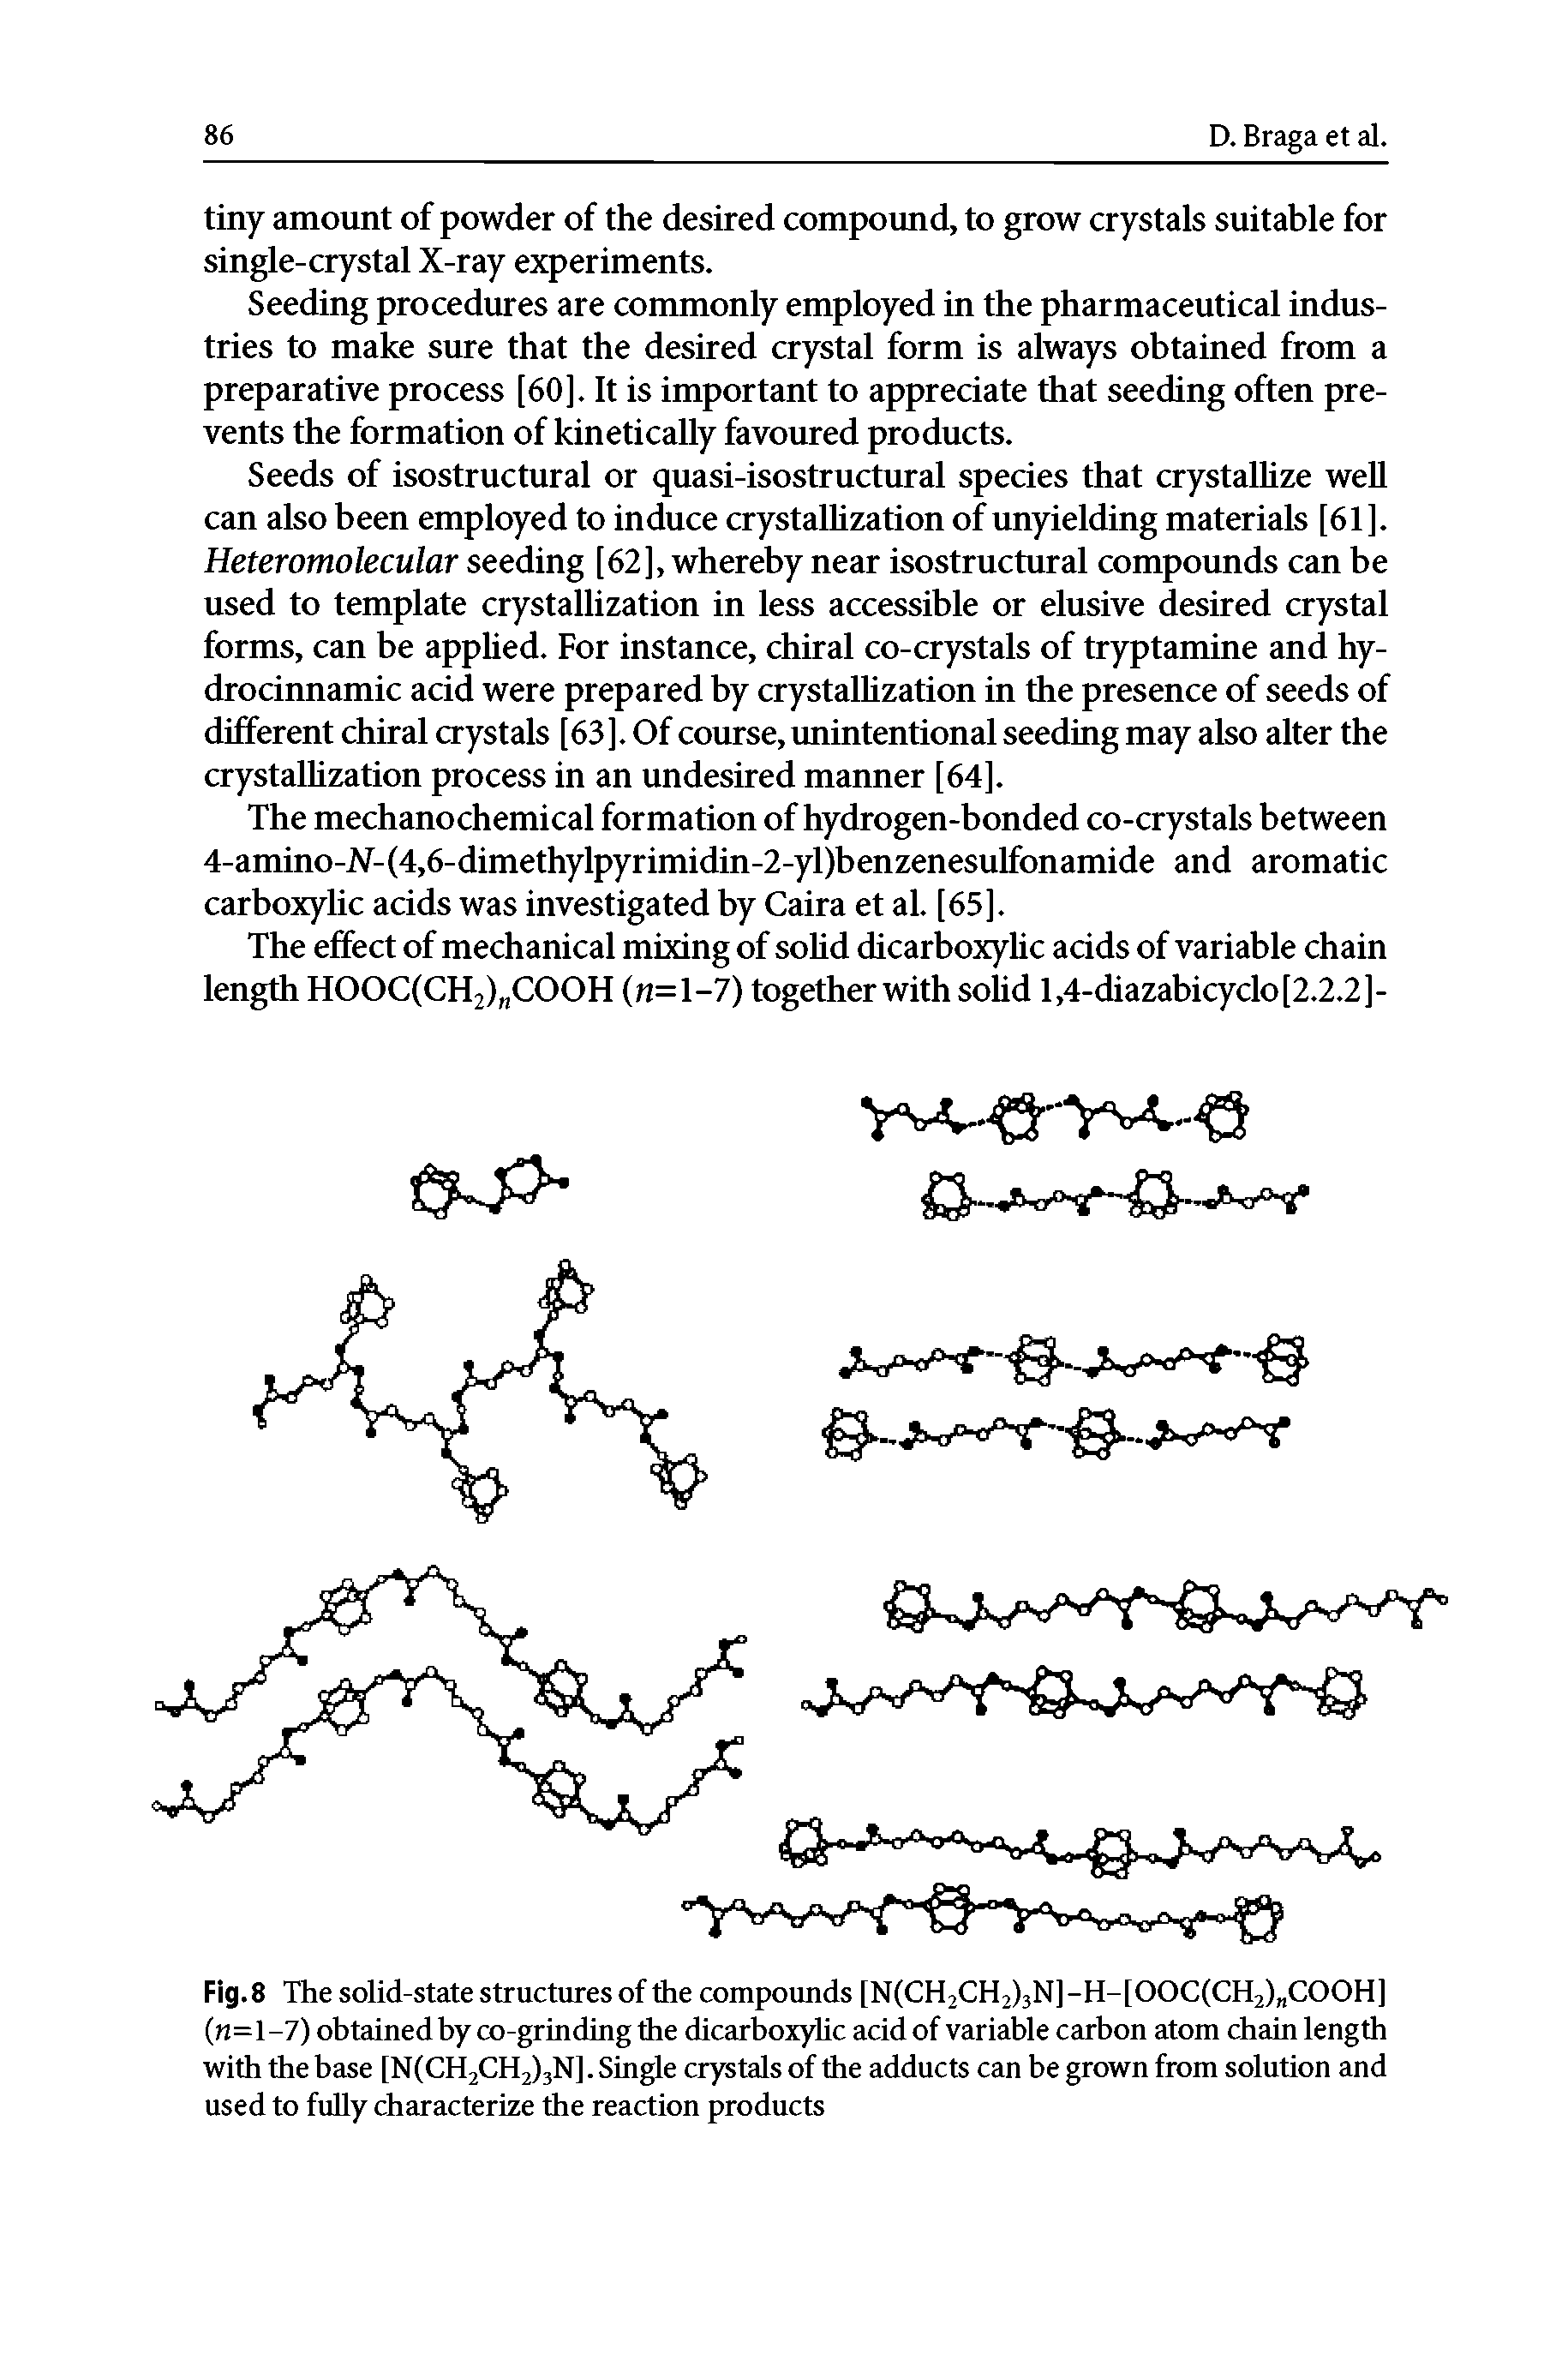 Fig.8 The solid-state structures of the compounds [N(CH2CH2)3N]-H-[OOC(CH2) COOH] (n=l-7) obtained hy co-grinding the dicarhoxyhc acid of variable carbon atom chain length with the base [N(CH2CH2)3N]. Single crystals of the adducts can be grown from solution and used to fuUy characterize the reaction products...